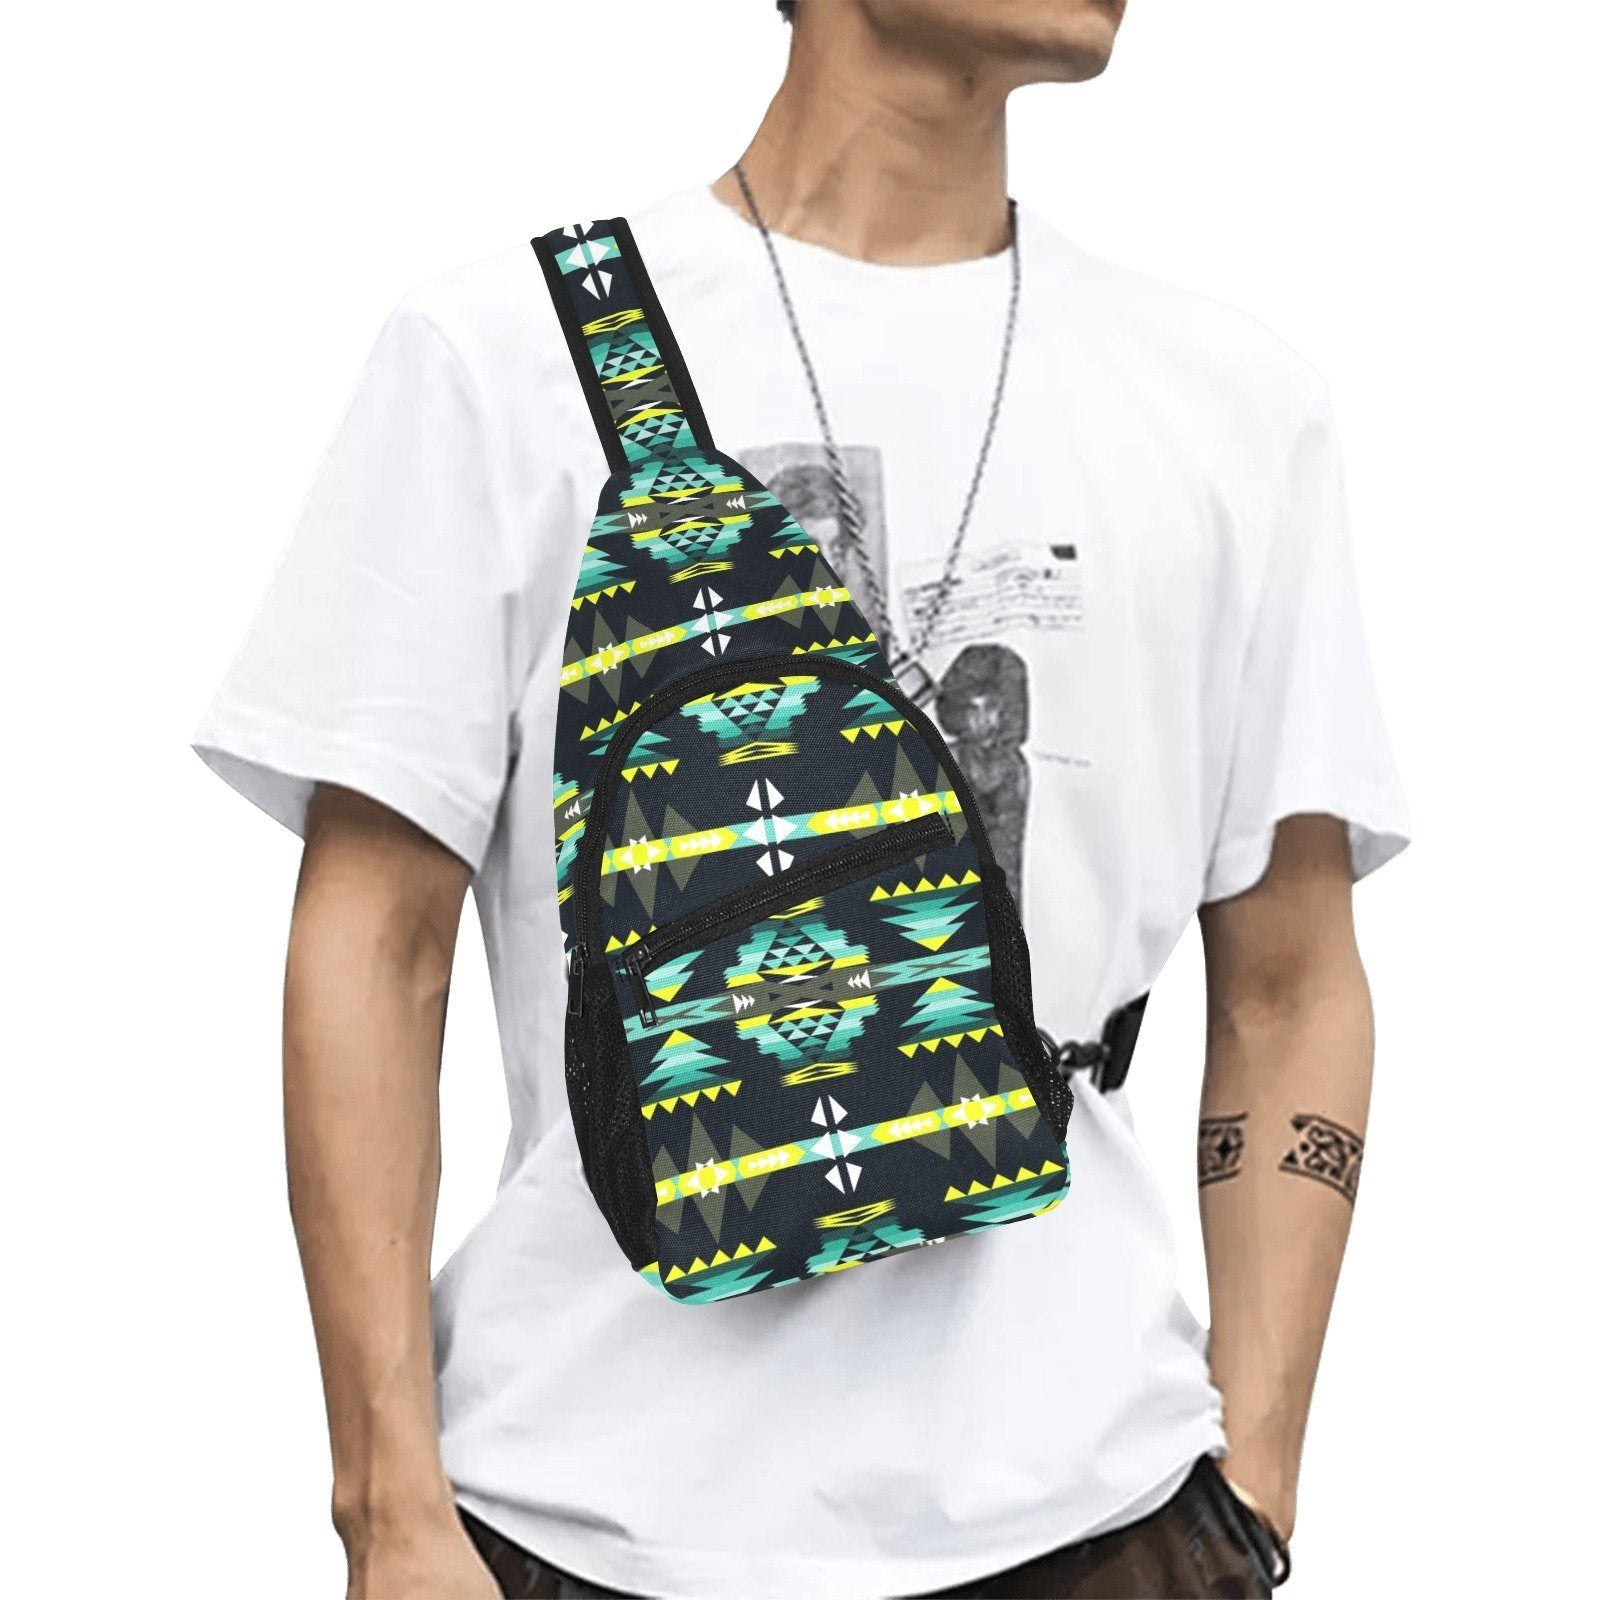 River Trail All Over Print Chest Bag (Model 1719) All Over Print Chest Bag (1719) e-joyer 